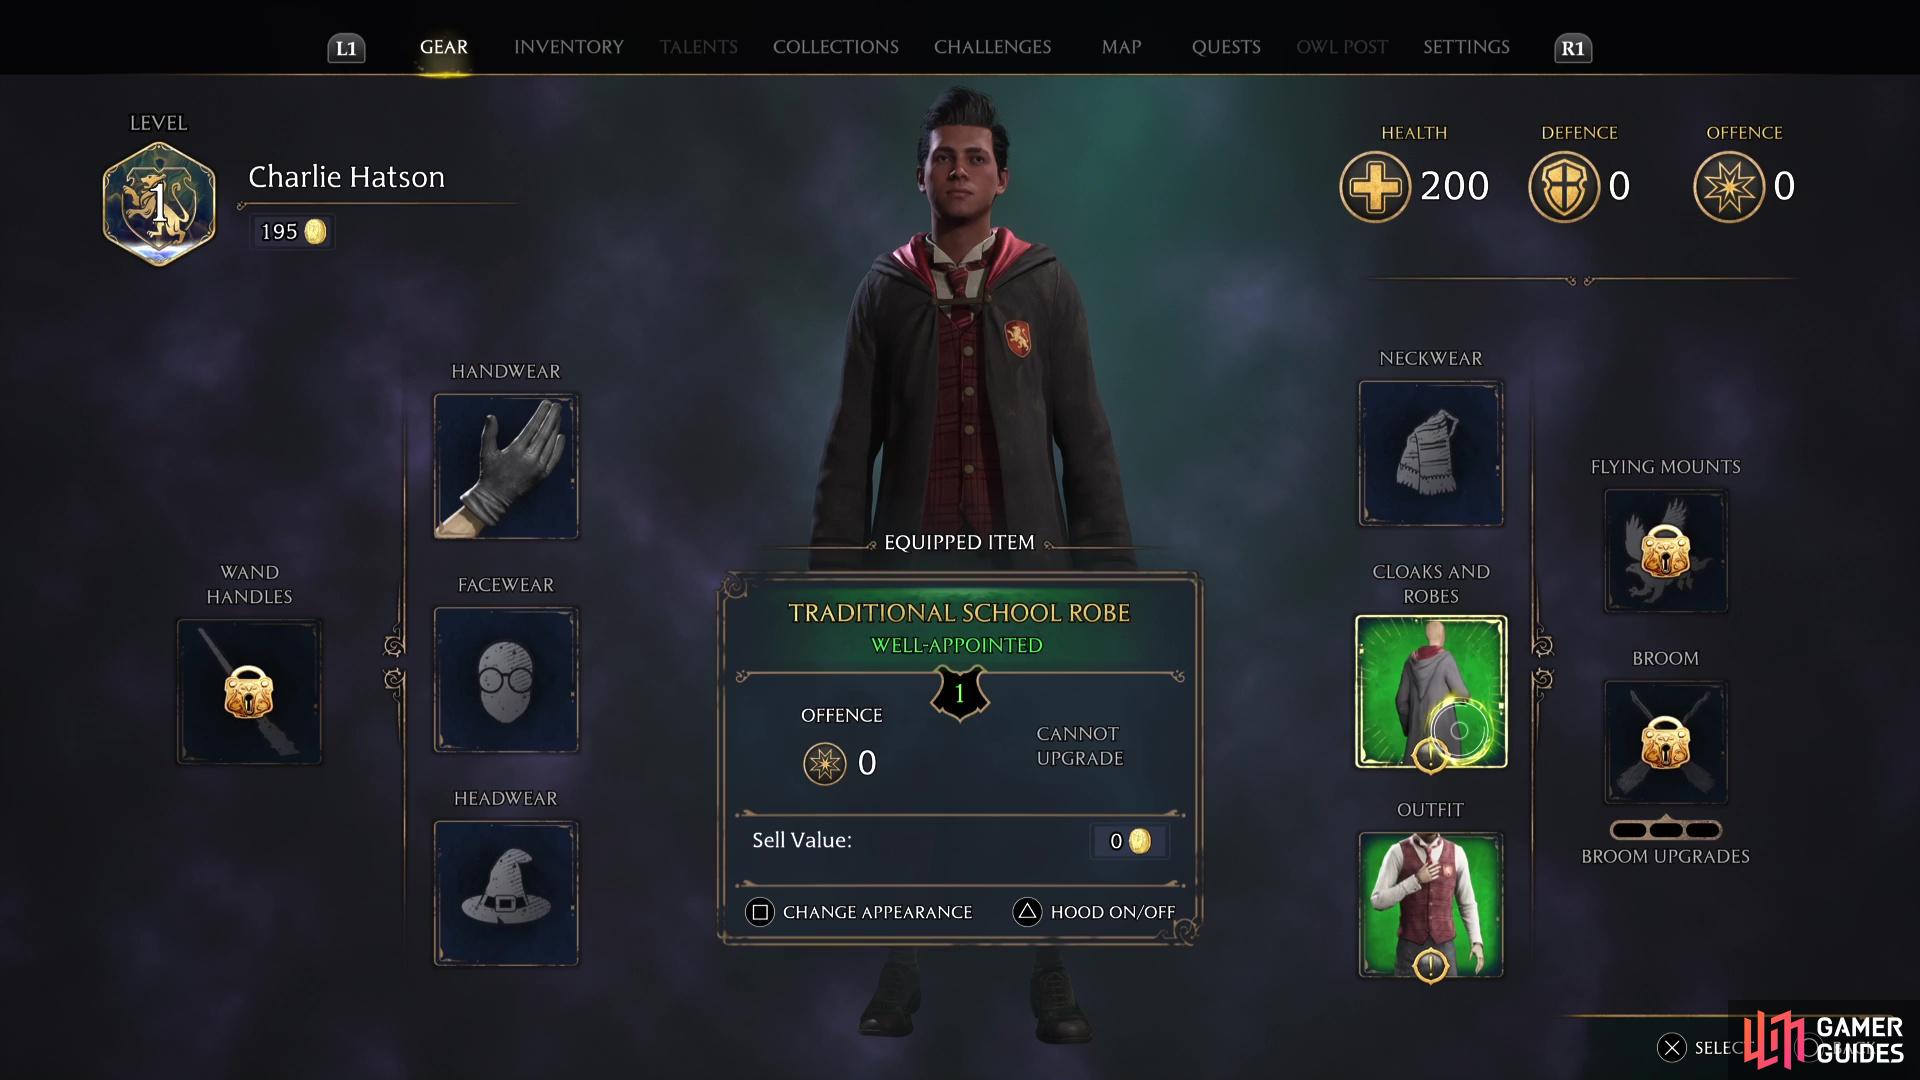 Head to the Gear screen and hit the appearance button to find your items.